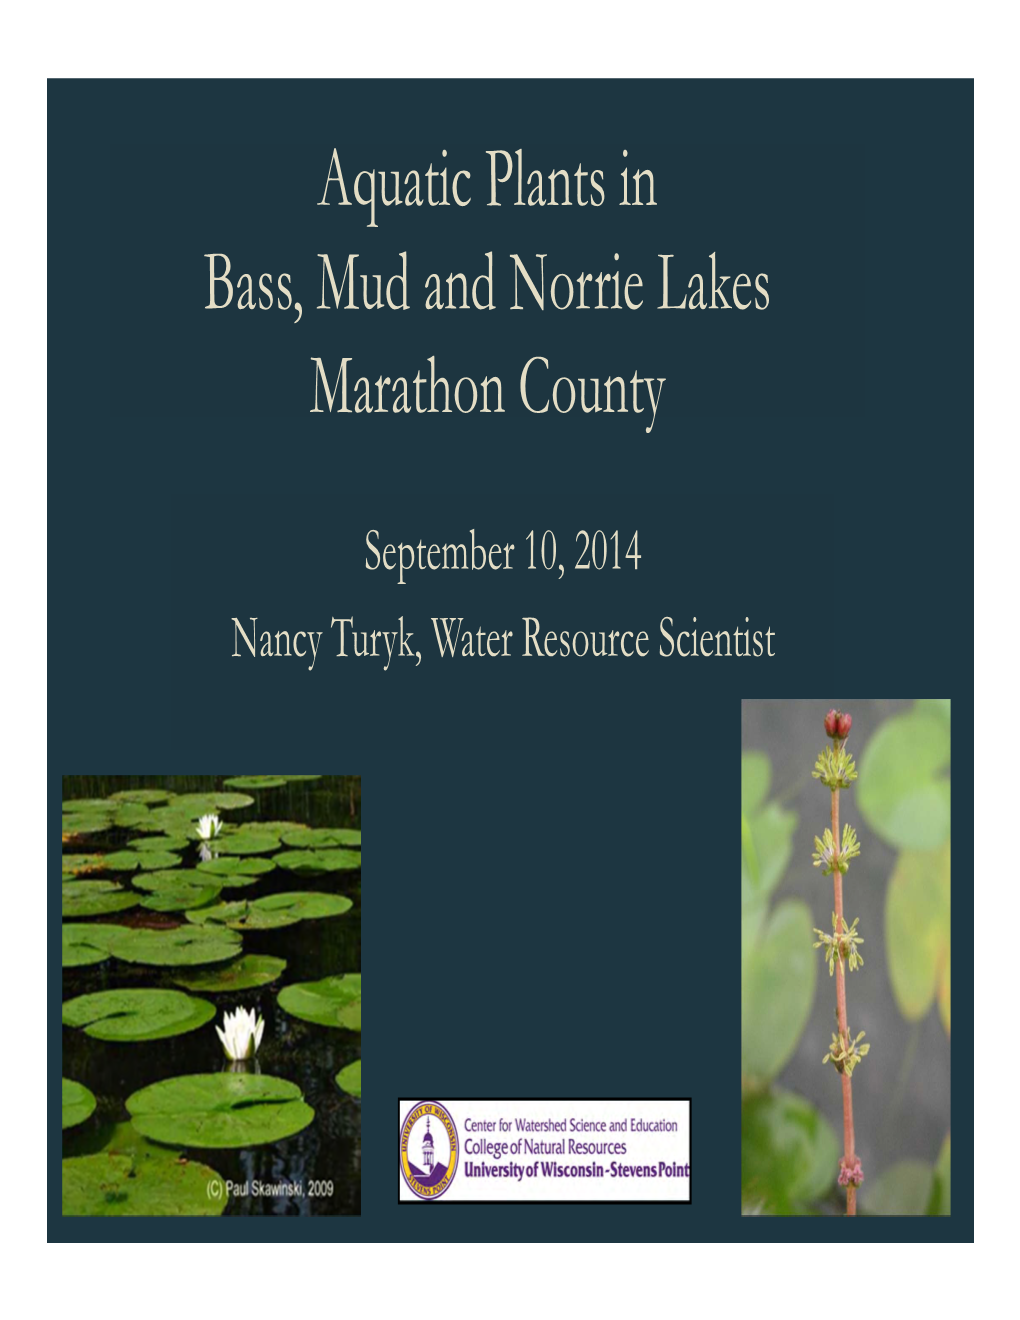 Aquatic Plants in Bass, Mud and Norrie Lakes Marathon County